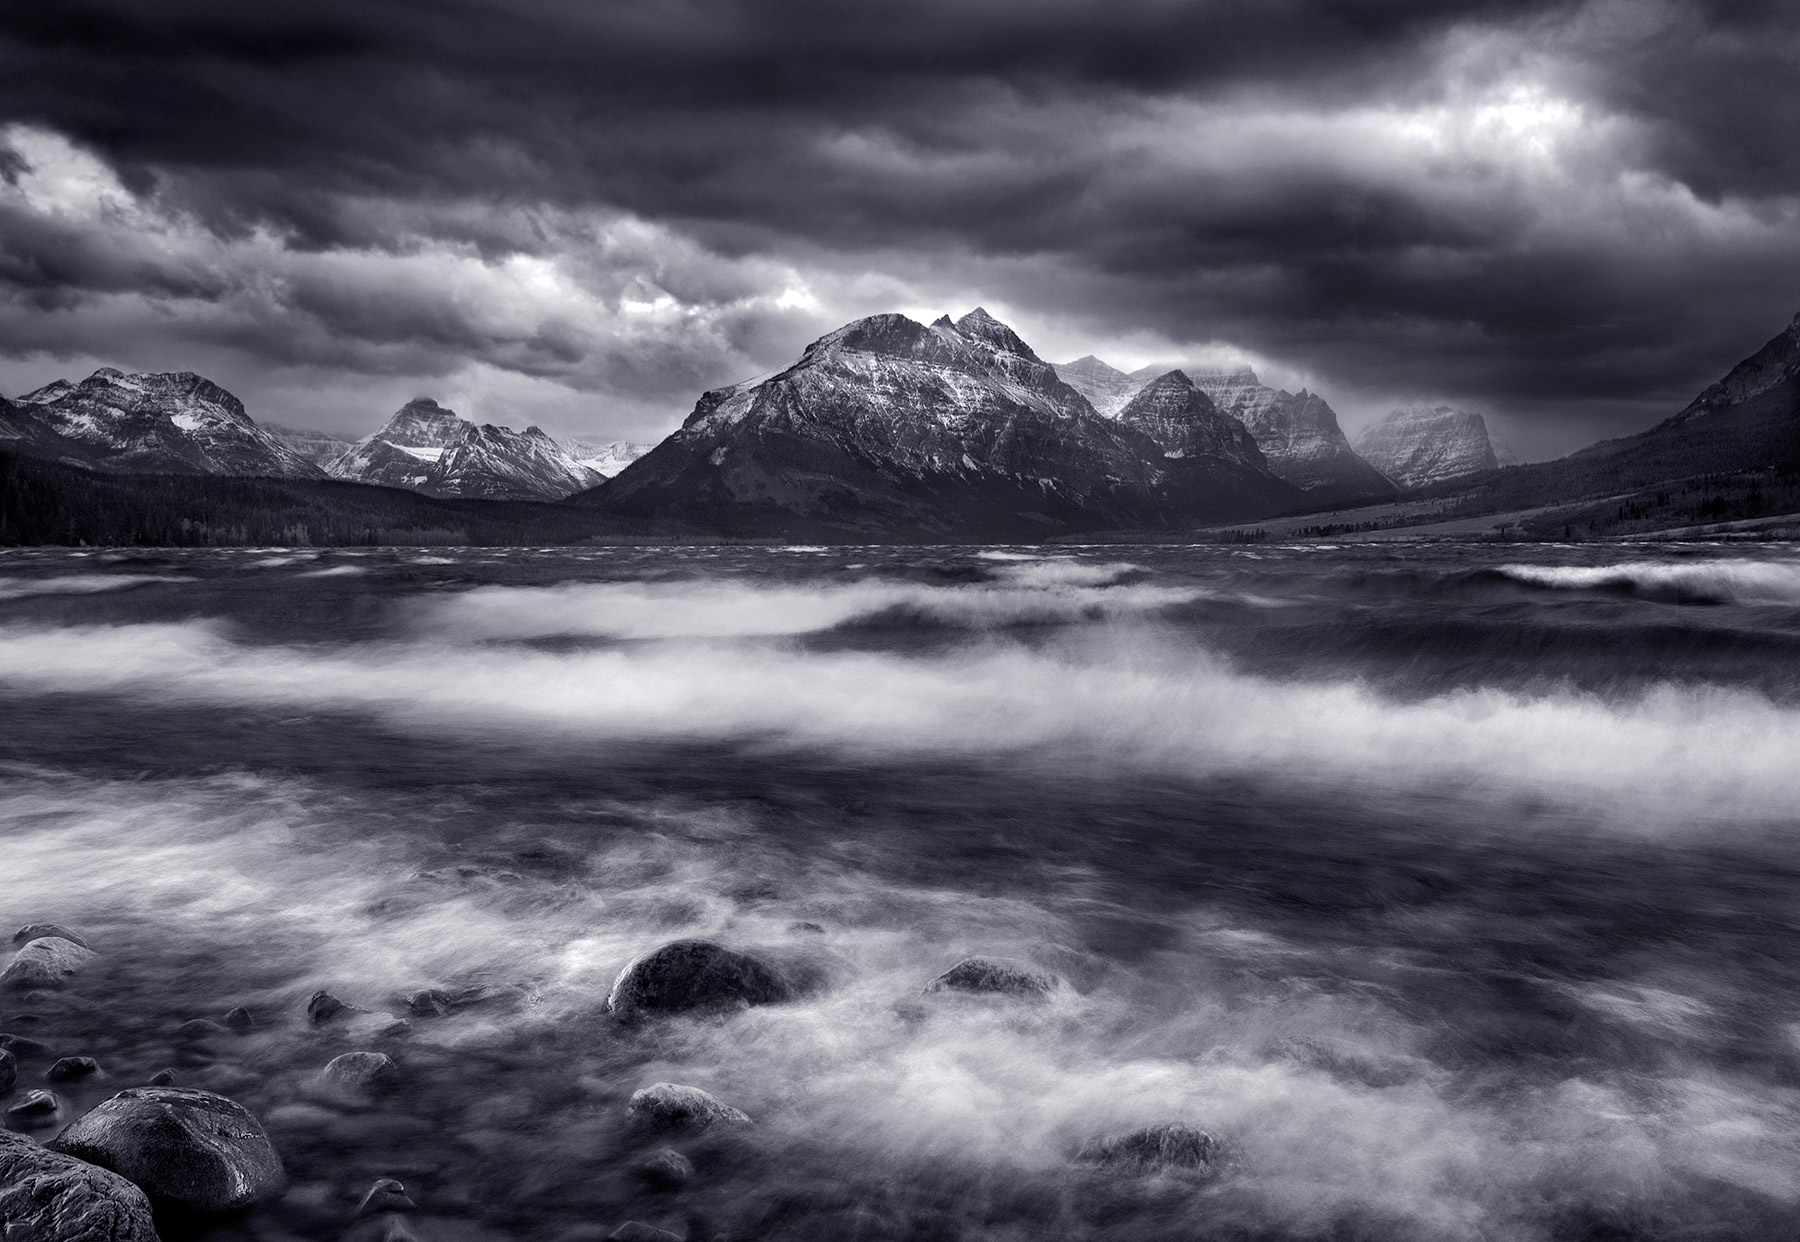 Dramatic skies and violent waters as a winter storm descends on Saint Mary lake in Glacier National Park.